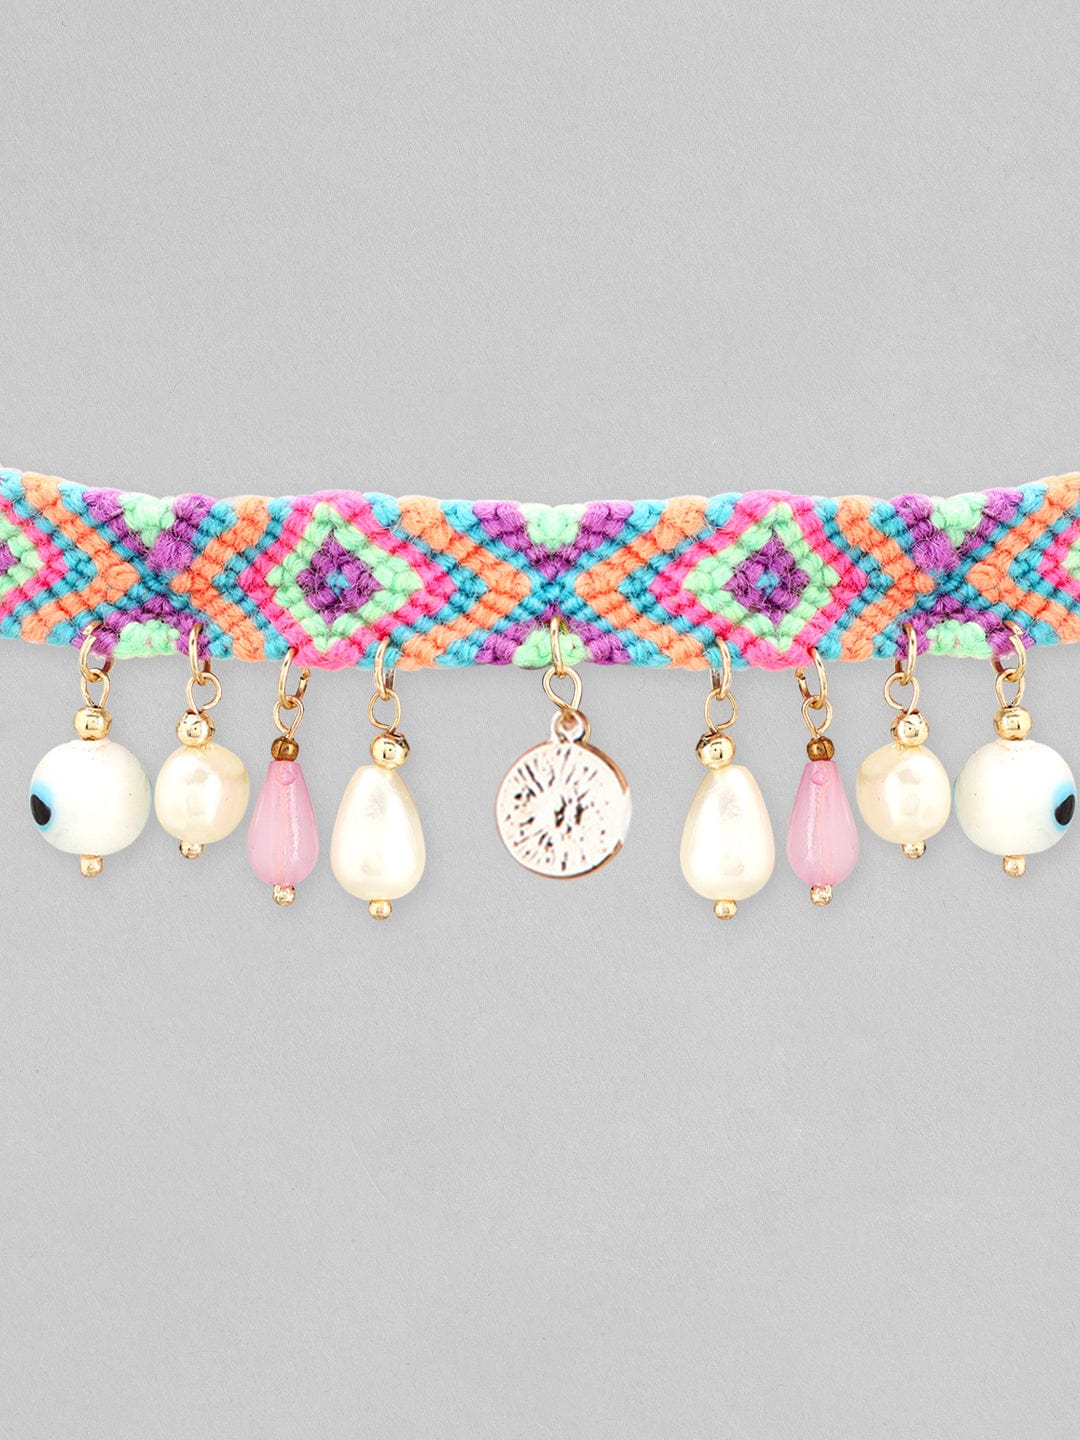 Rubans Voguish Pink Blue Necklace With Hanging Beads And Pearls Chain & Necklaces